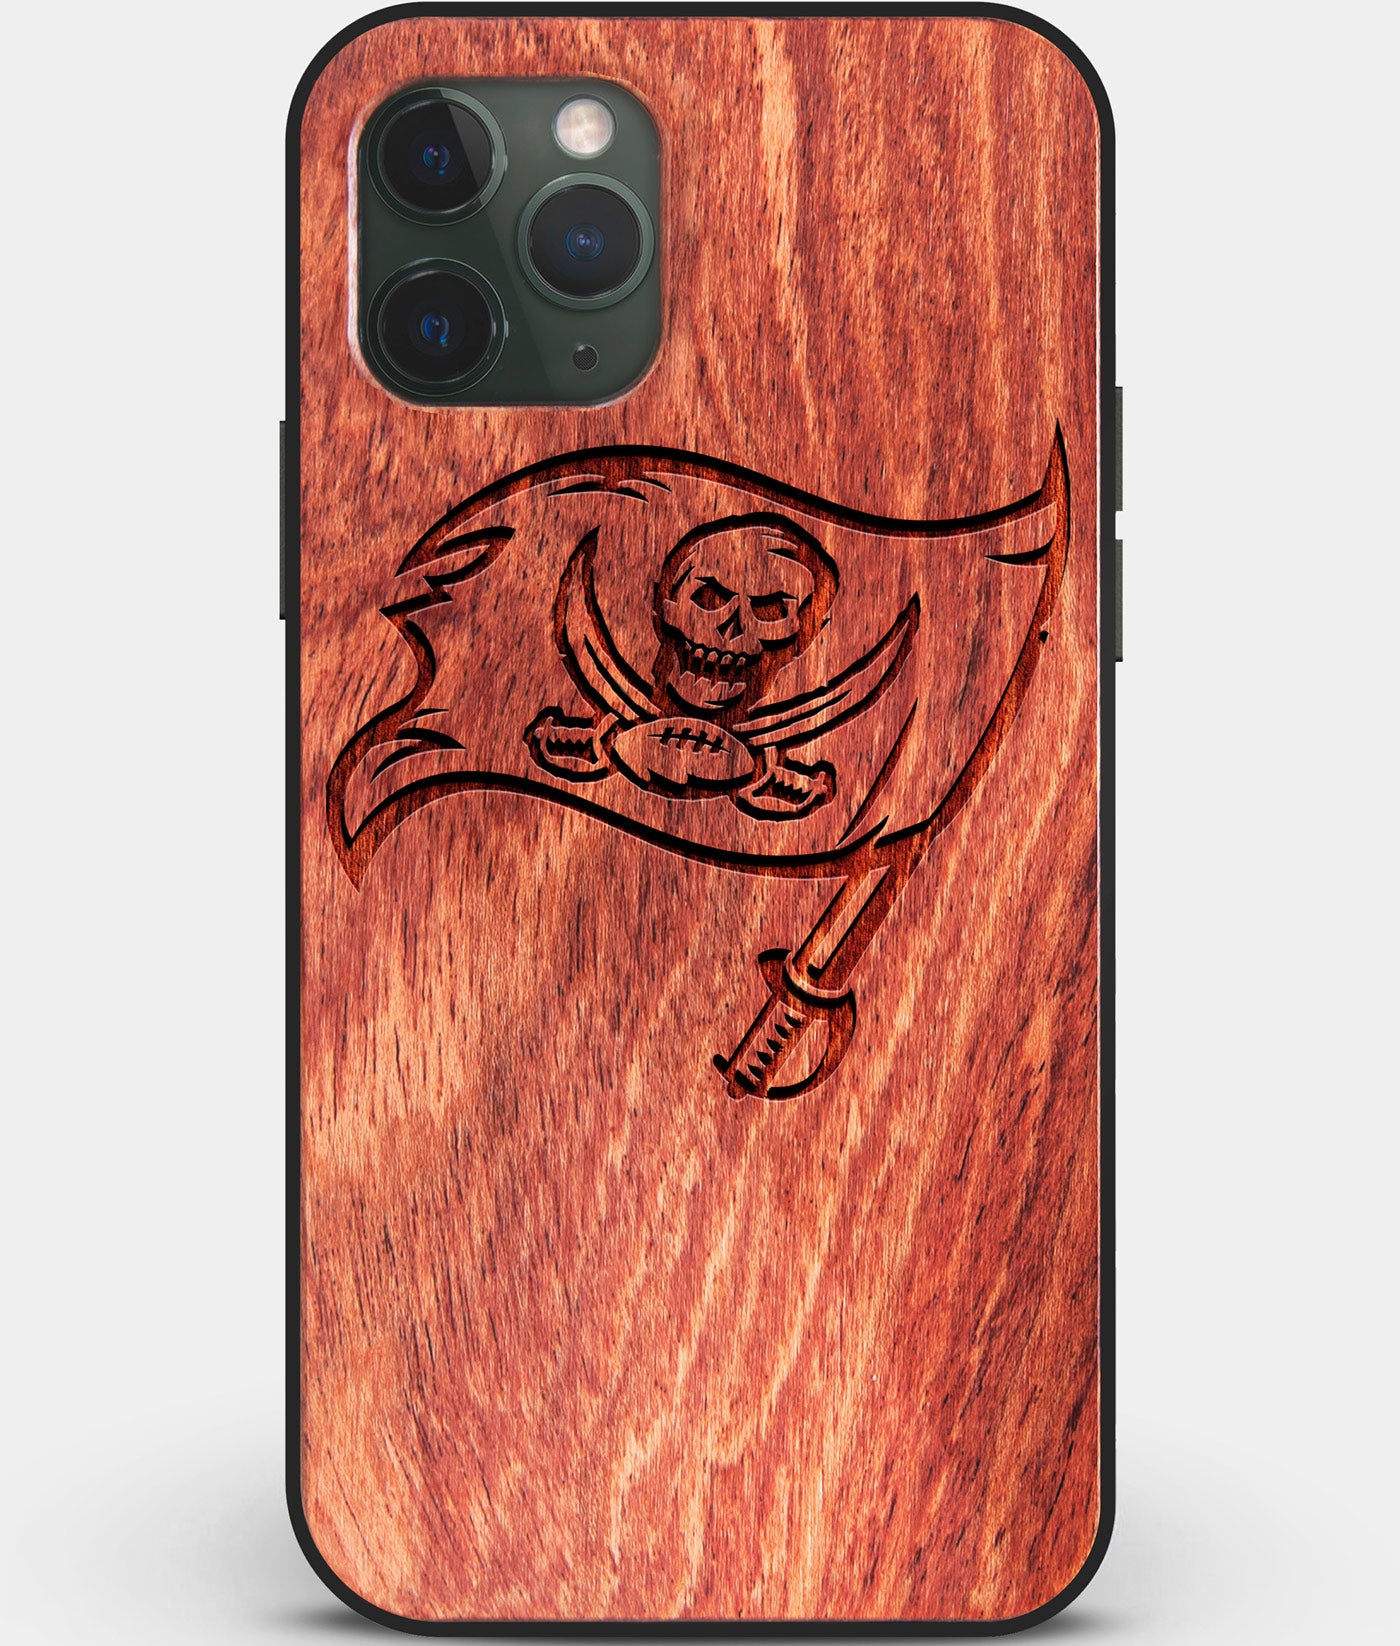 Custom Carved Wood Tampa Bay Buccaneers iPhone 11 Pro Max Case | Personalized Mahogany Wood Tampa Bay Buccaneers Cover, Birthday Gift, Gifts For Him, Monogrammed Gift For Fan | by Engraved In Nature